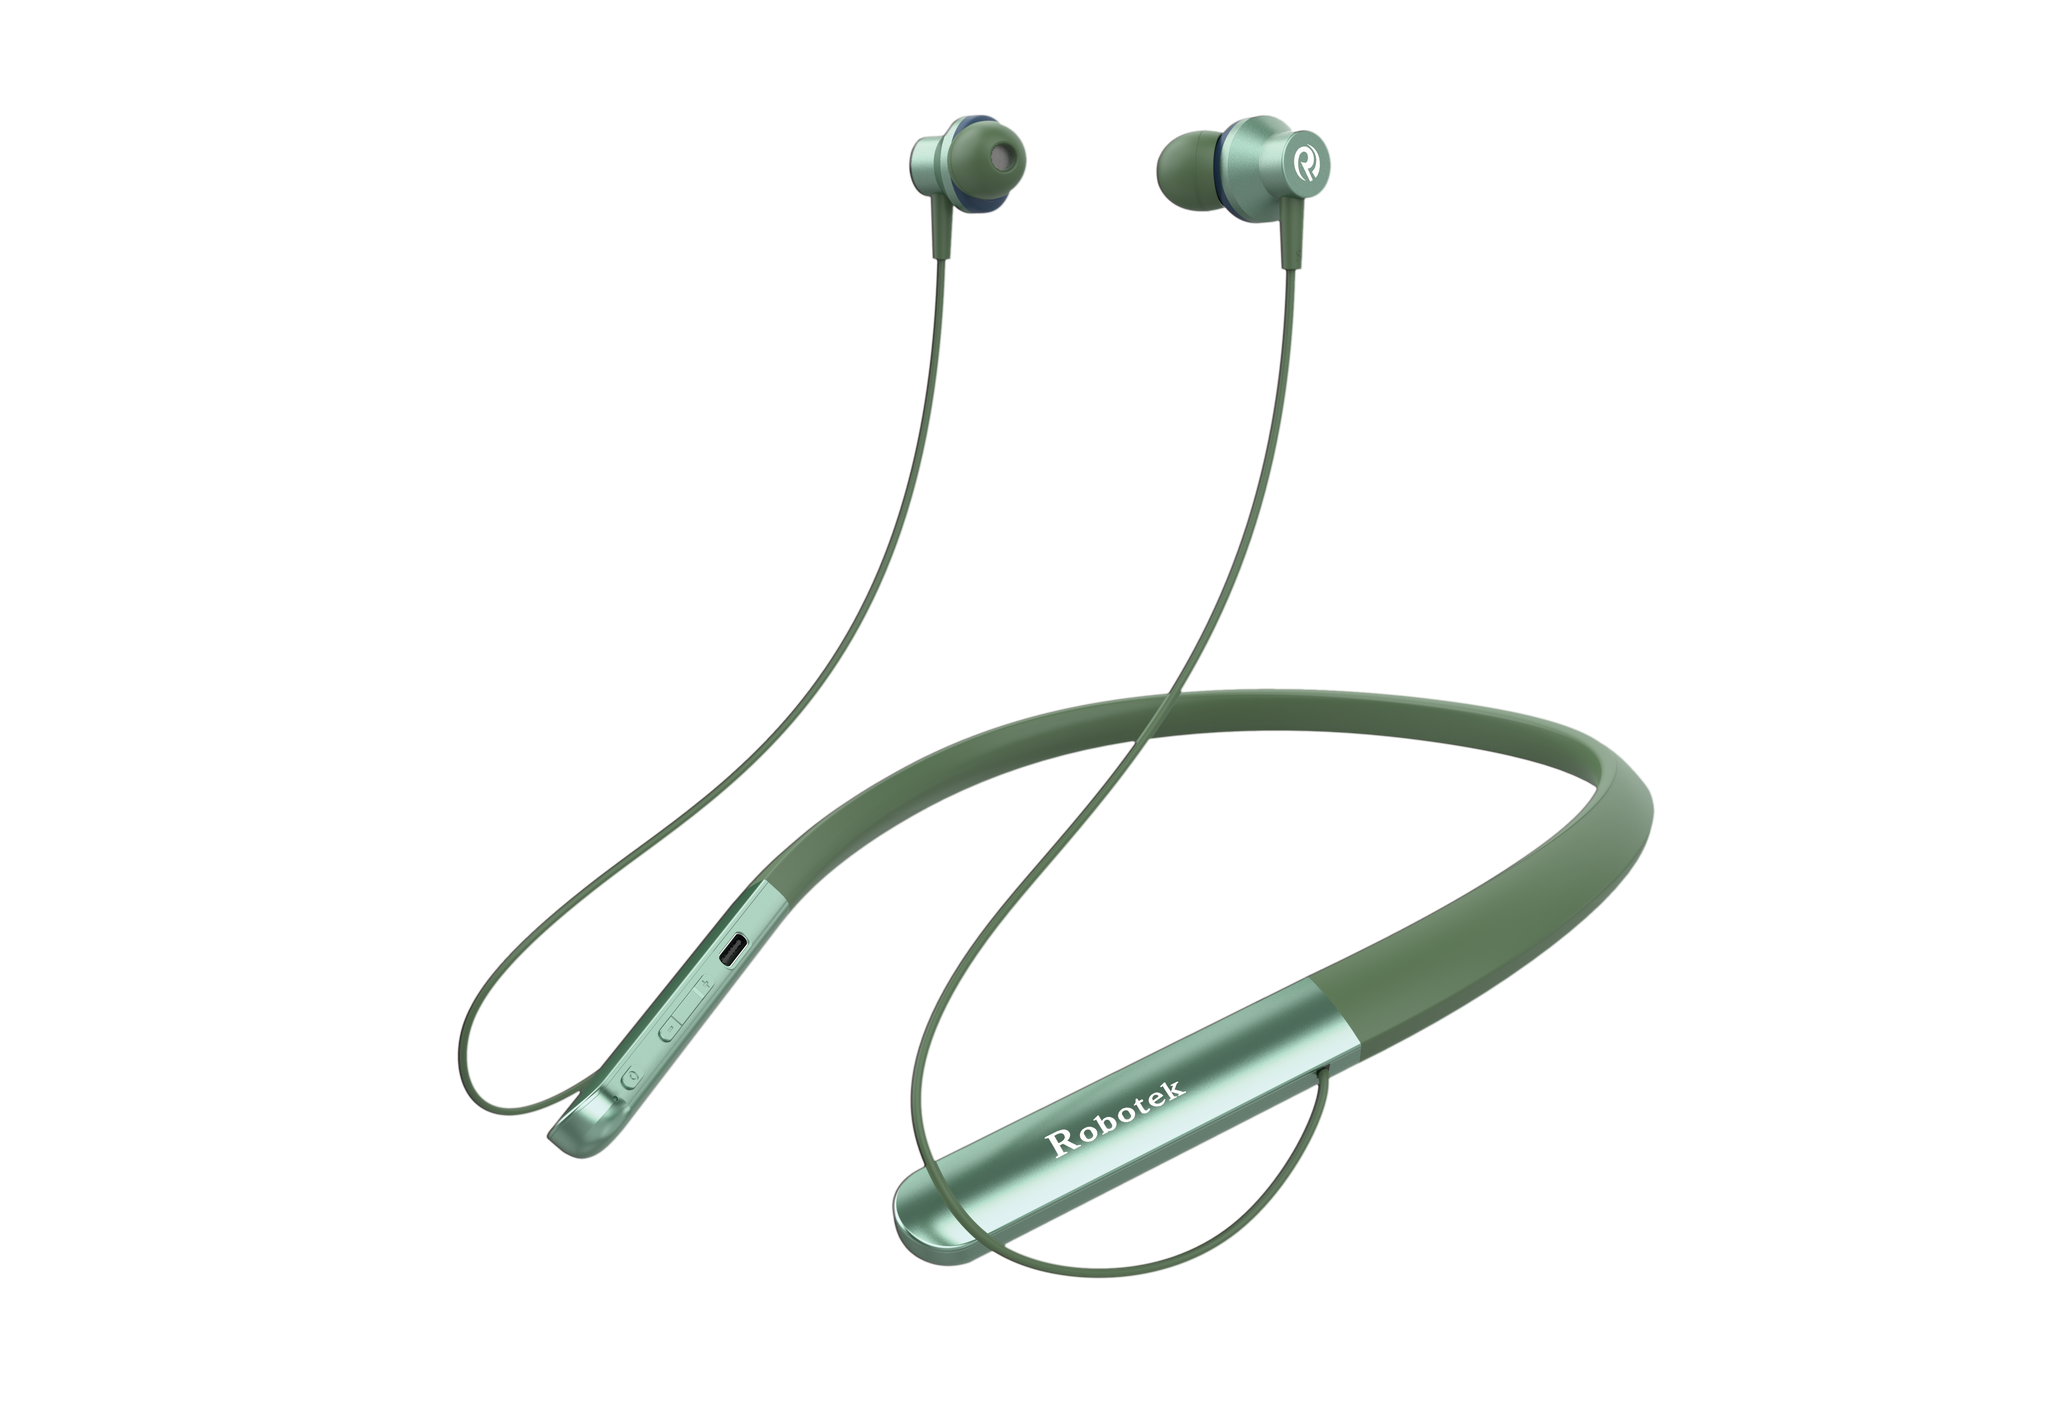 YOG Wireless Bluetooth in Ear Headphones, 13mm Driver, Upto 27Hr Playback Deep Bass, Type-C Fast Charging (10Mins=7.5Hrs Playtime), HD Calls, Fast Charging Type-C Neckband, Magnetic Buds, IPX5 Water Resistant & Sweatproof